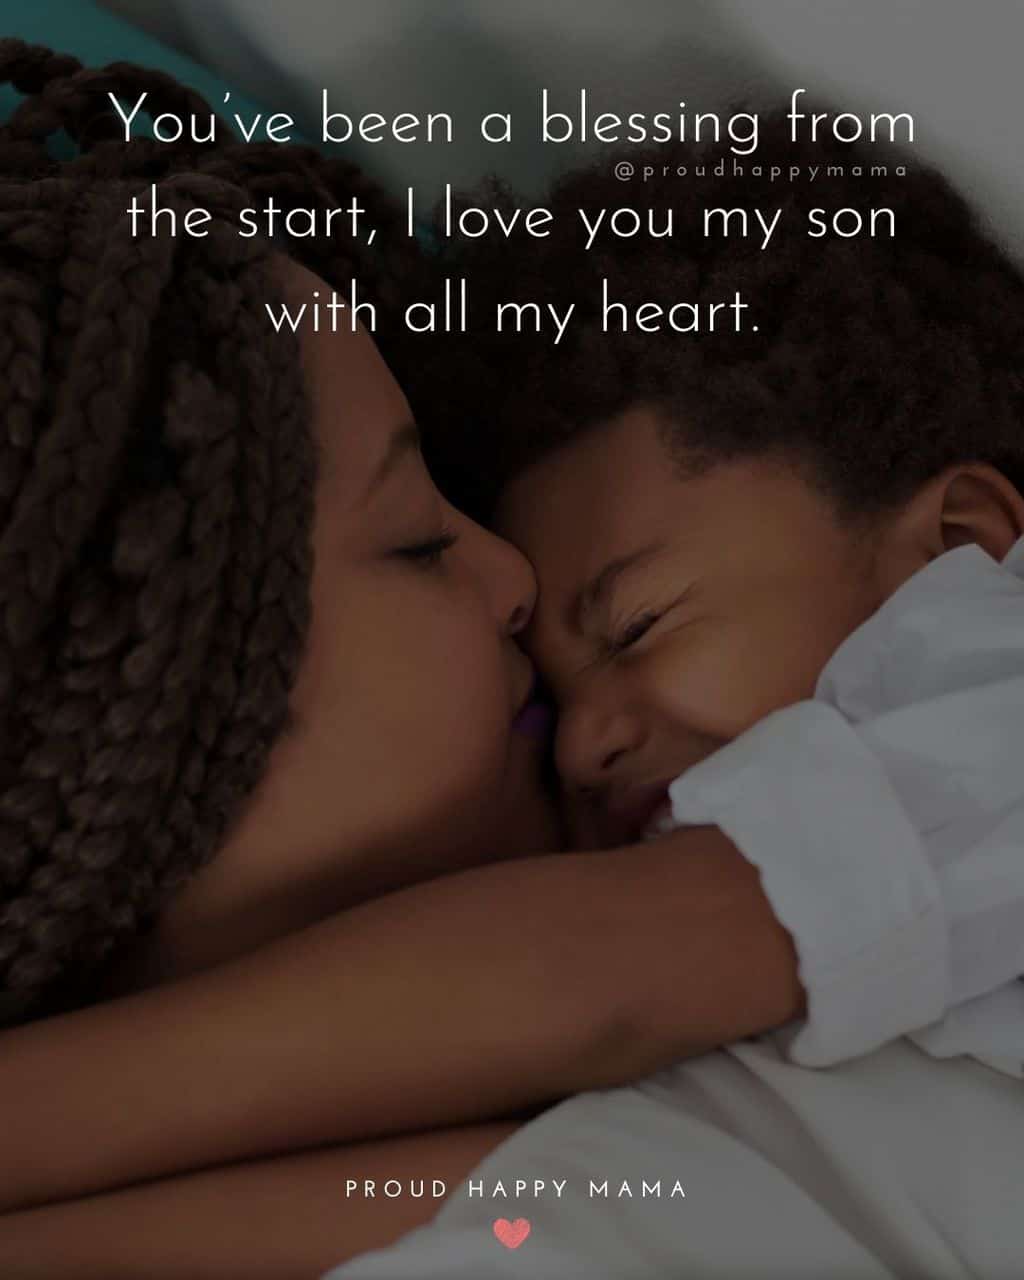 Son Quotes - You’ve been a blessing from the start, I love you my son with all my heart.’